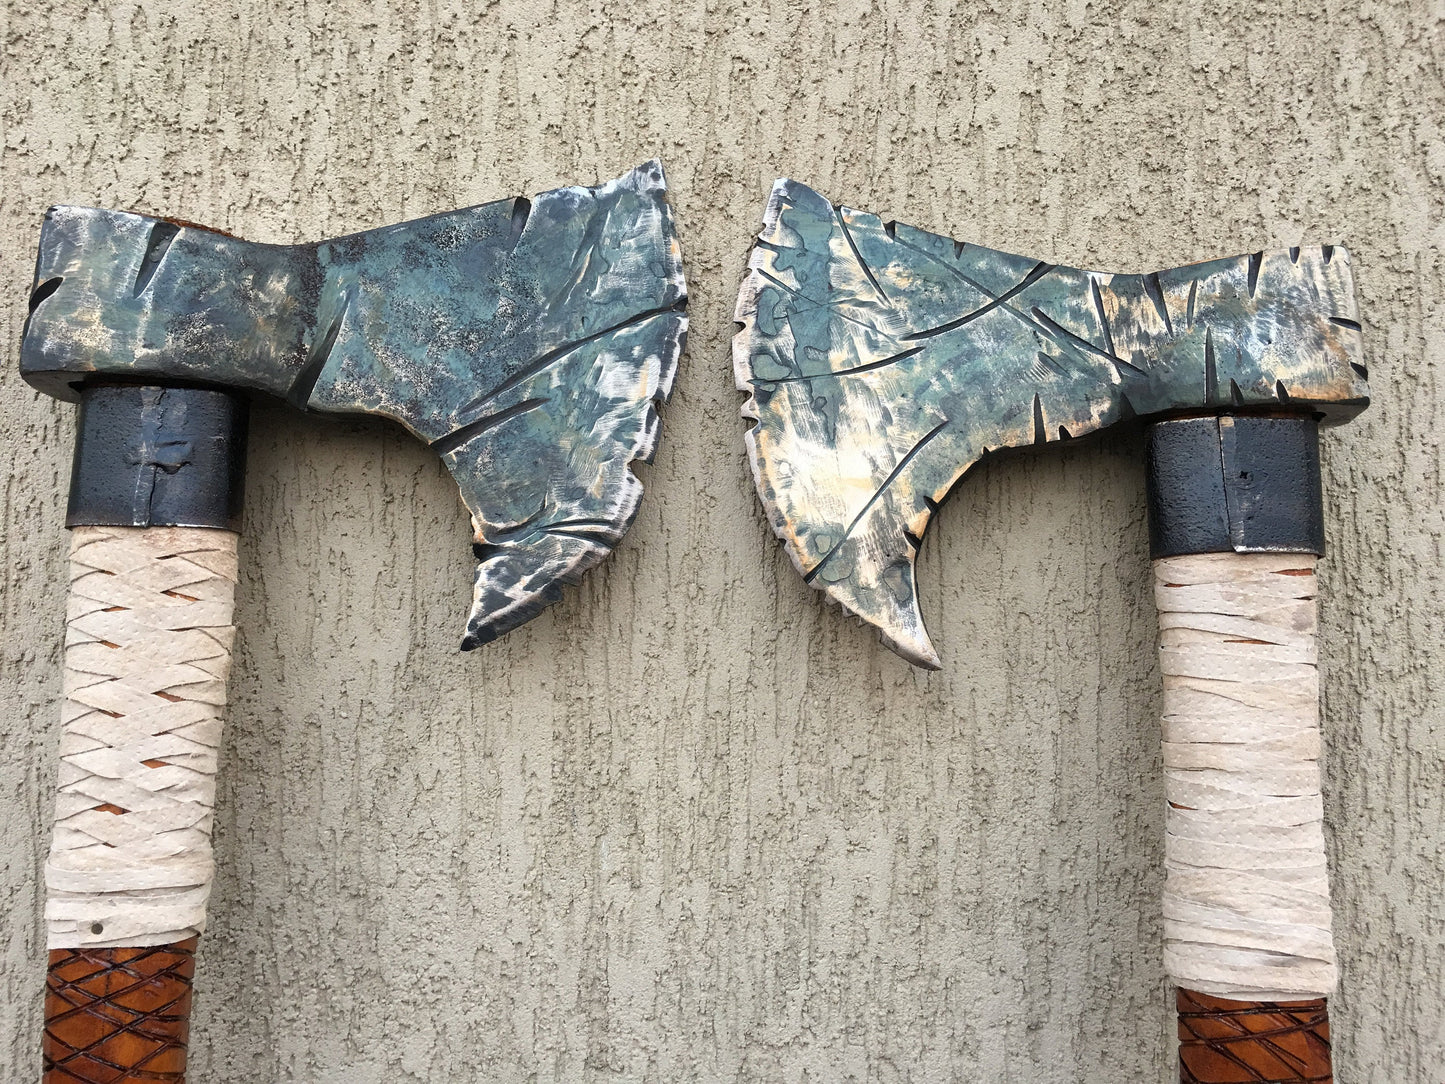 Berserker axe, viking axe, For Honor axe, costume weapon, cosplay, The Vikings, gamer gifts, Skyrim, viking warrior, collectible cosplay,axe